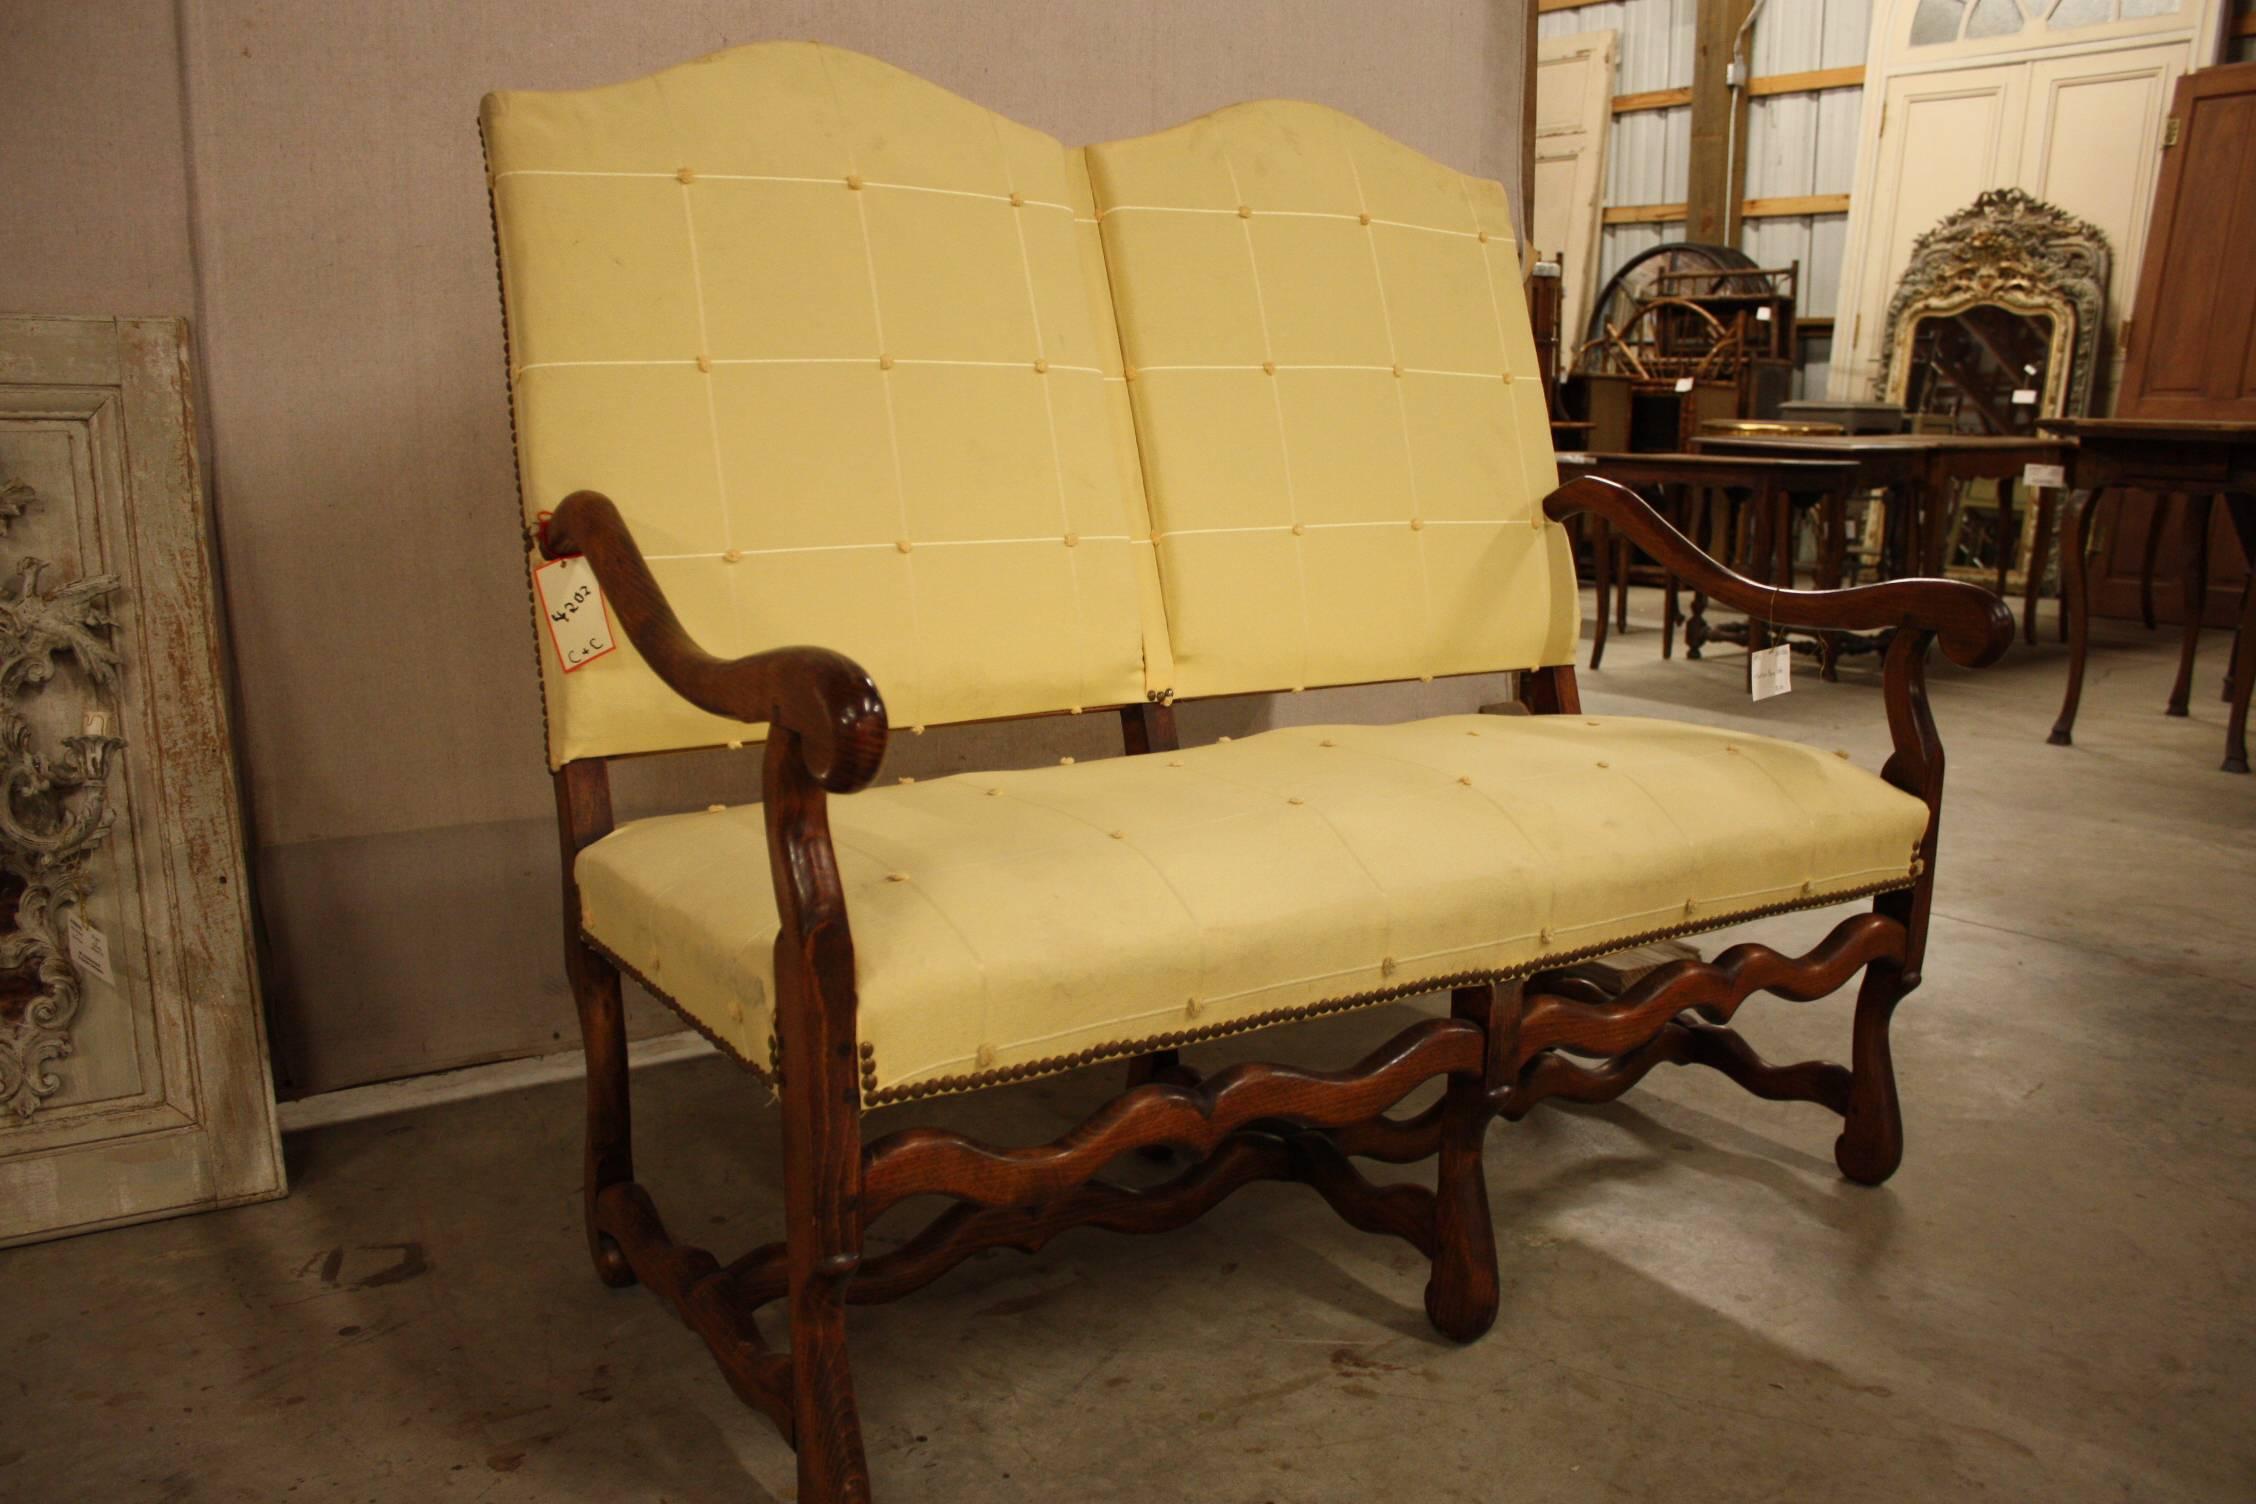 French Os de Mouton settee. Seat is 18 inches from the floor to the top of the cushion.